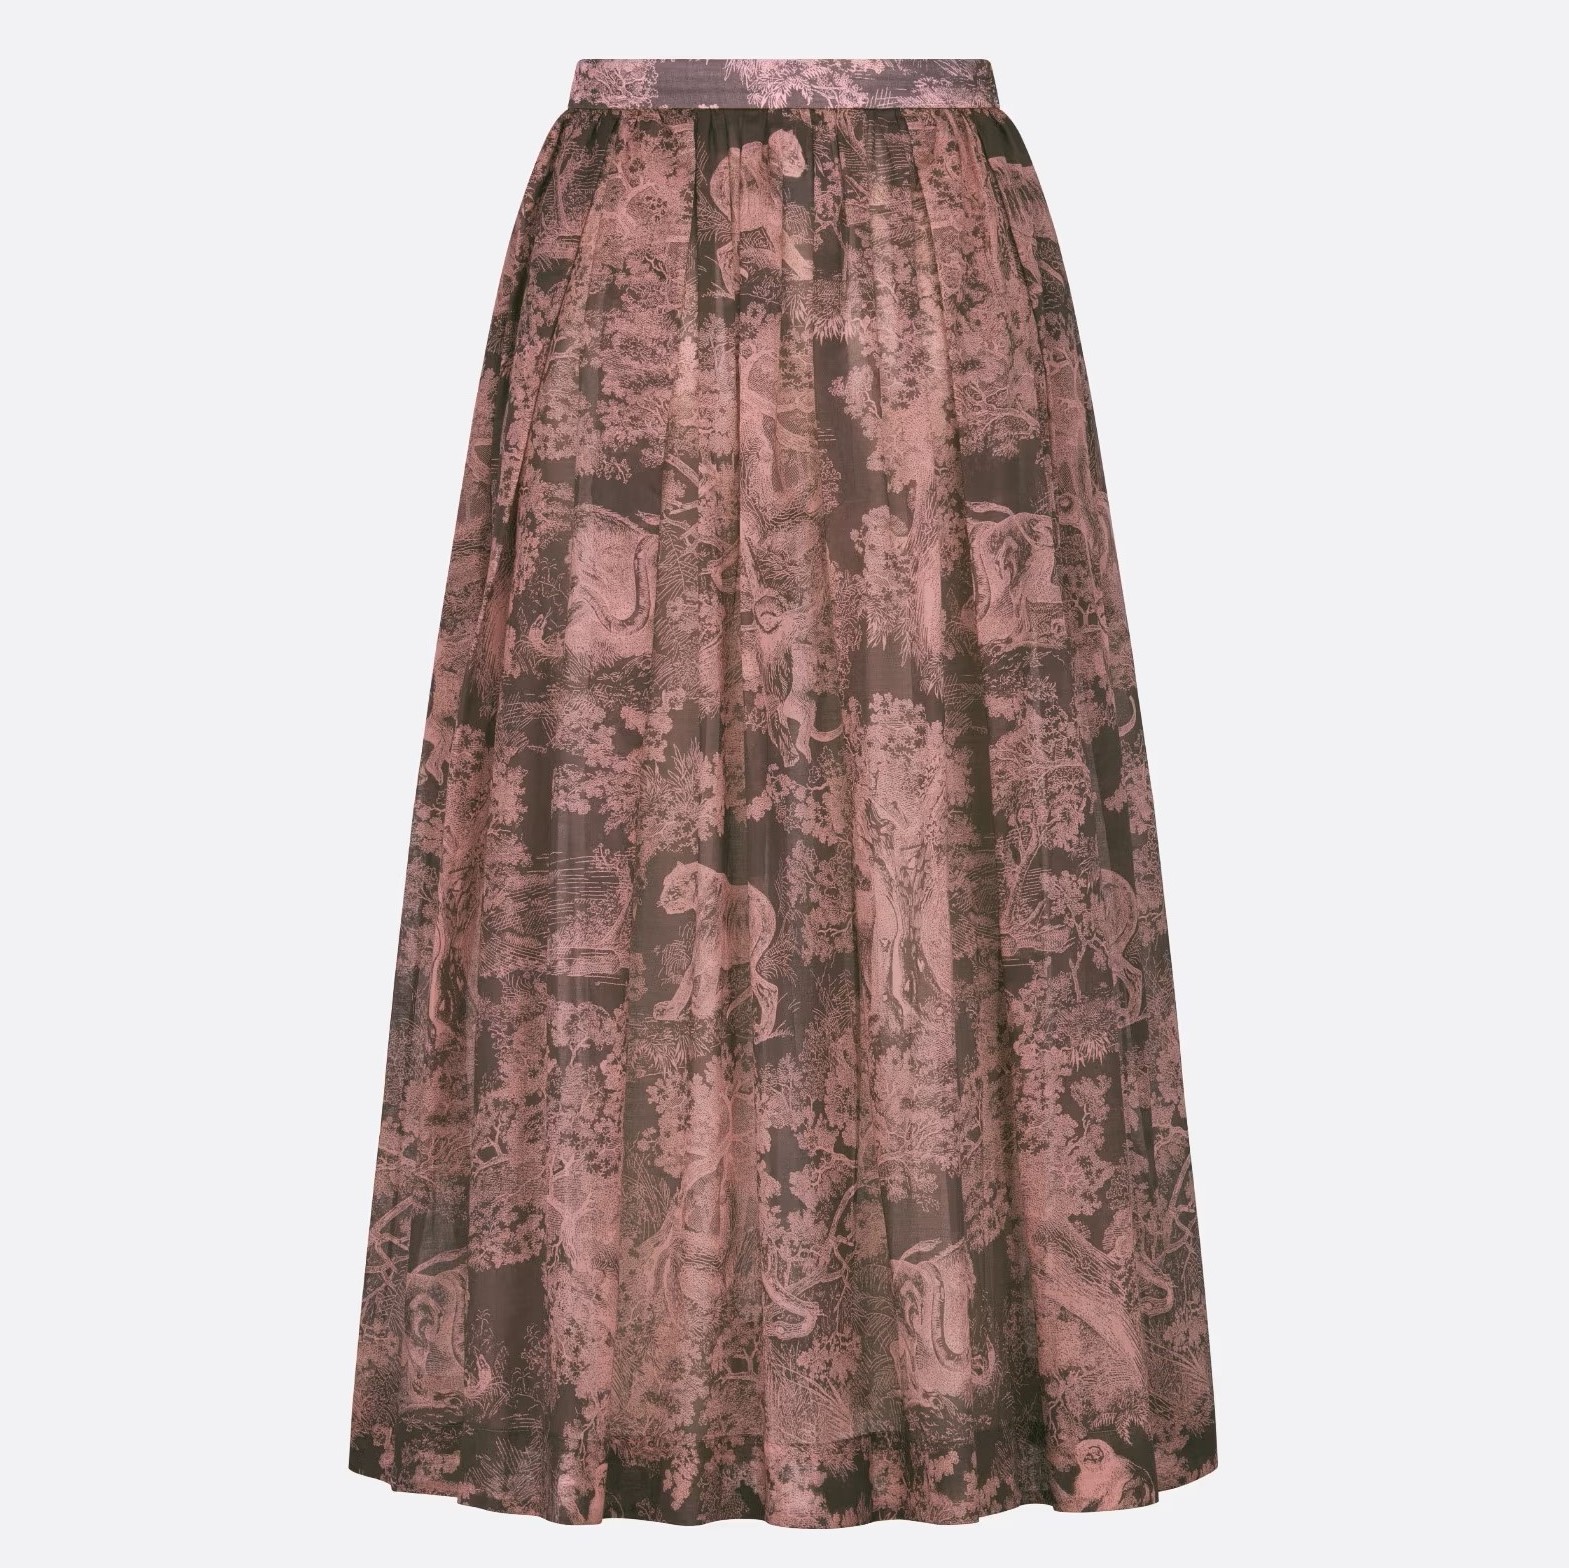 VÁY NỮ DÀI DIORIVIERA FLARED SKIRT GRAY AND PINK COTTON MUSLIN WITH TOILE DE JOUY REVERSE MOTIF 8